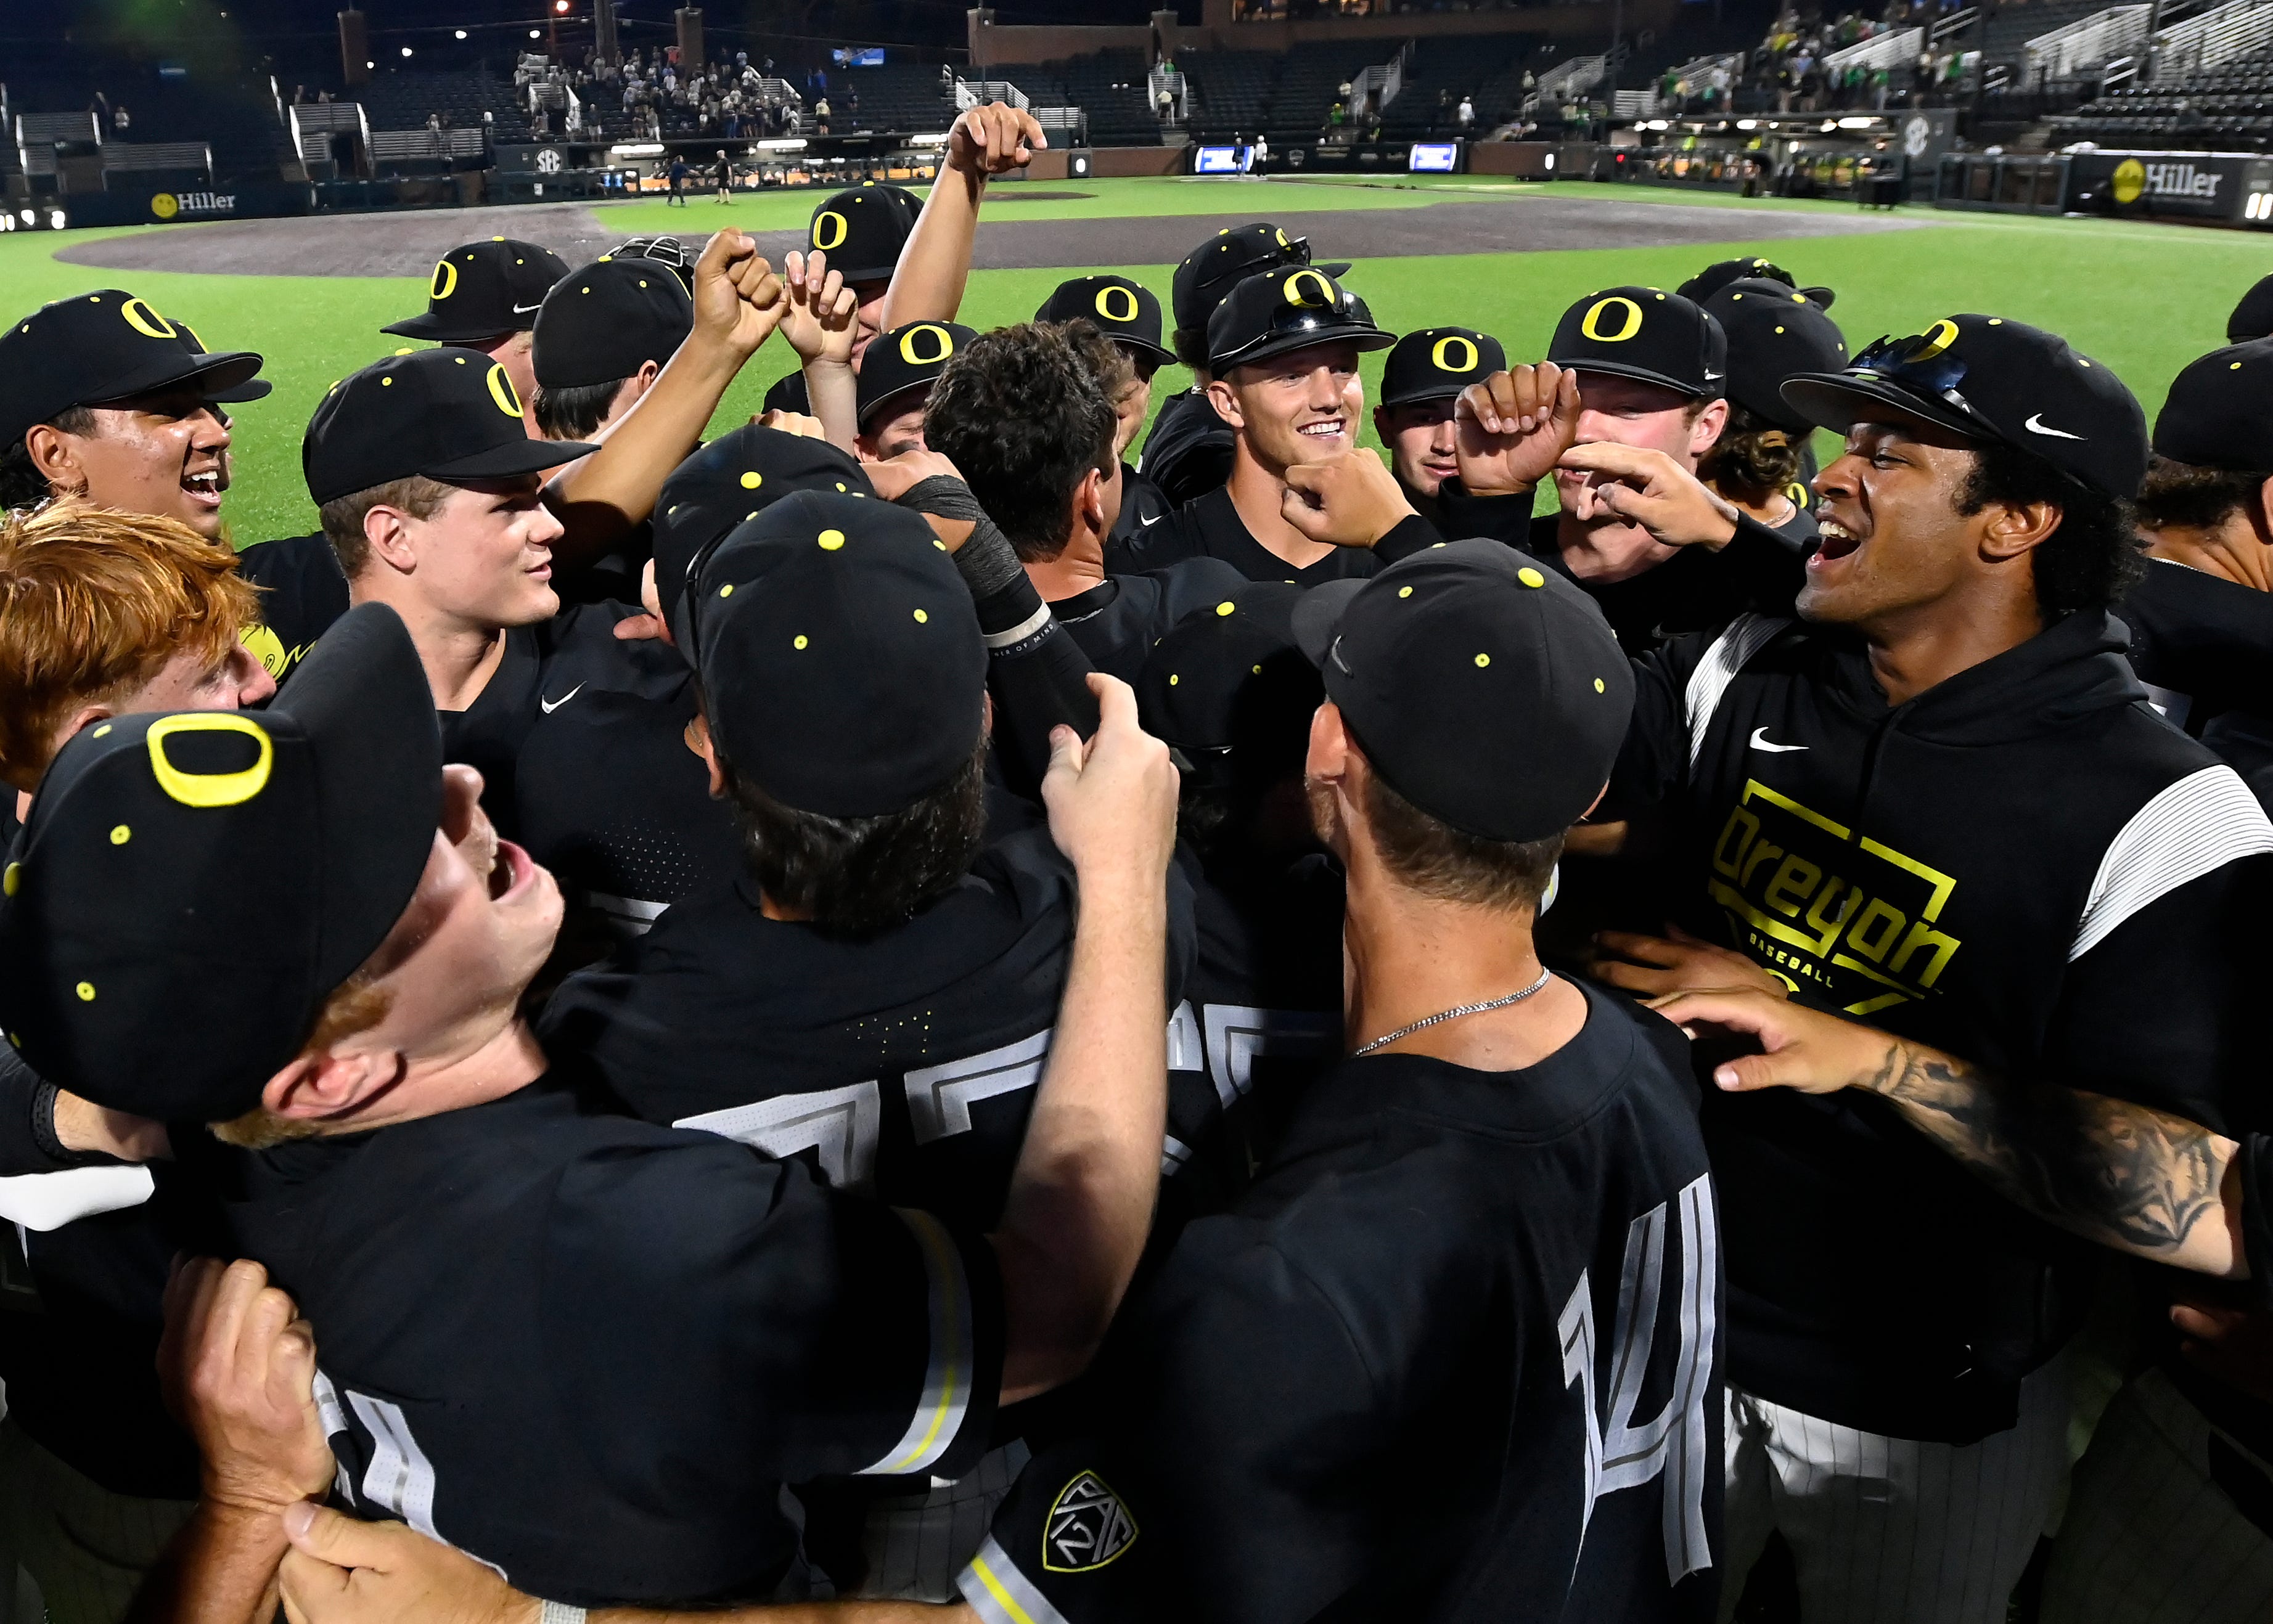 2023 NCAA Baseball Tournament Scores and Schedule, June 5 Sports